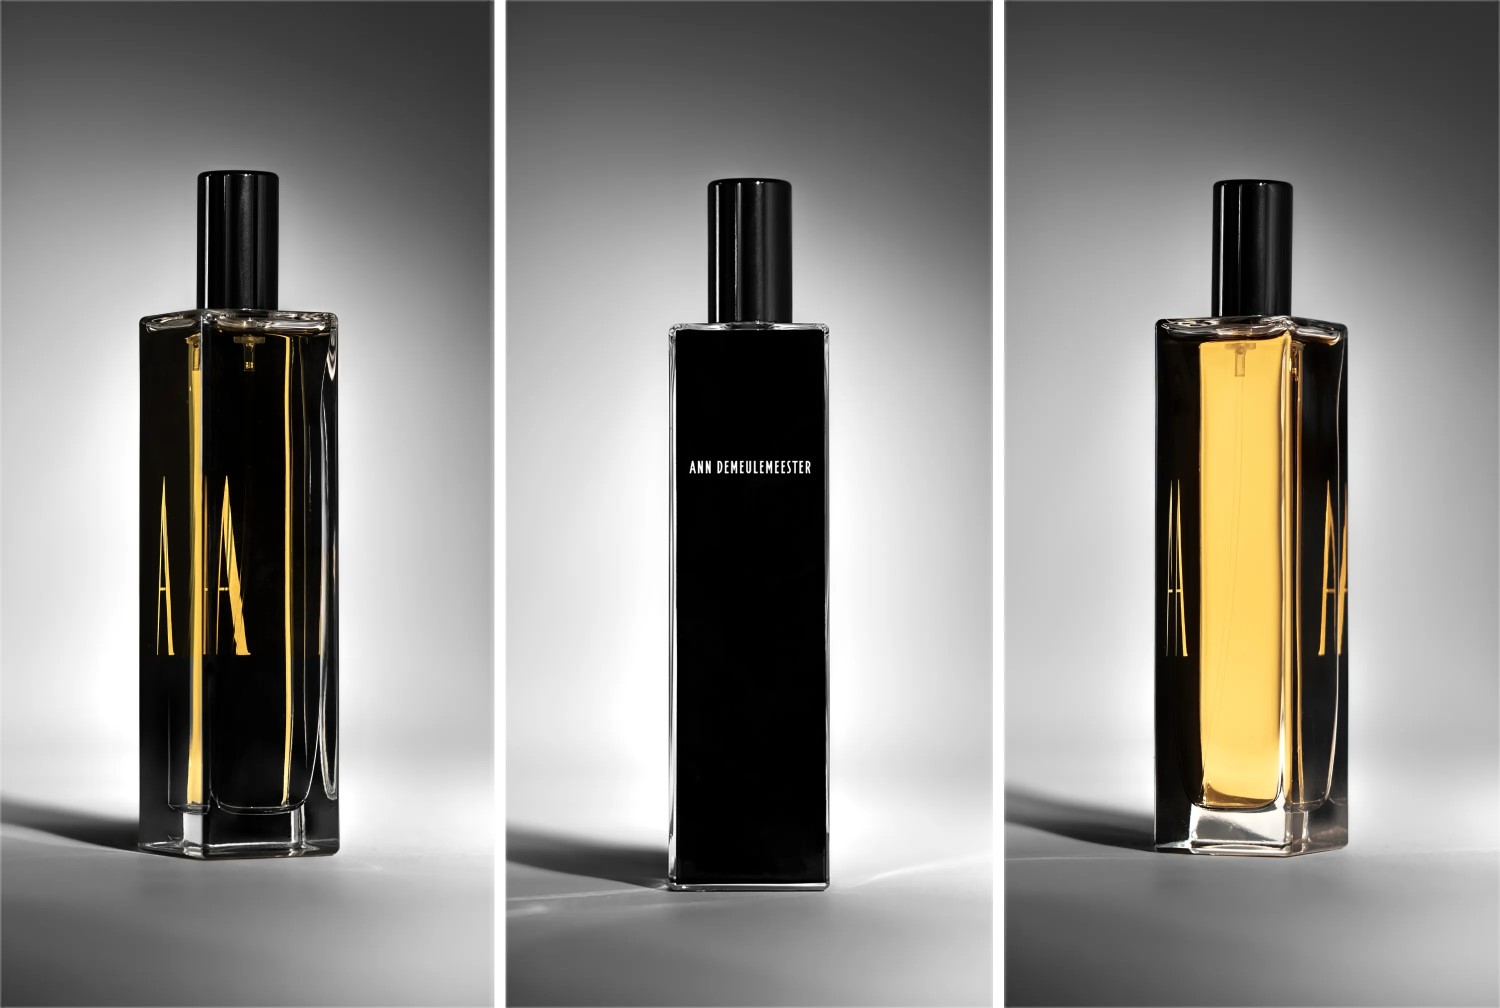 Ann Demeulemeester's debut fragrance A captivates the fashion world